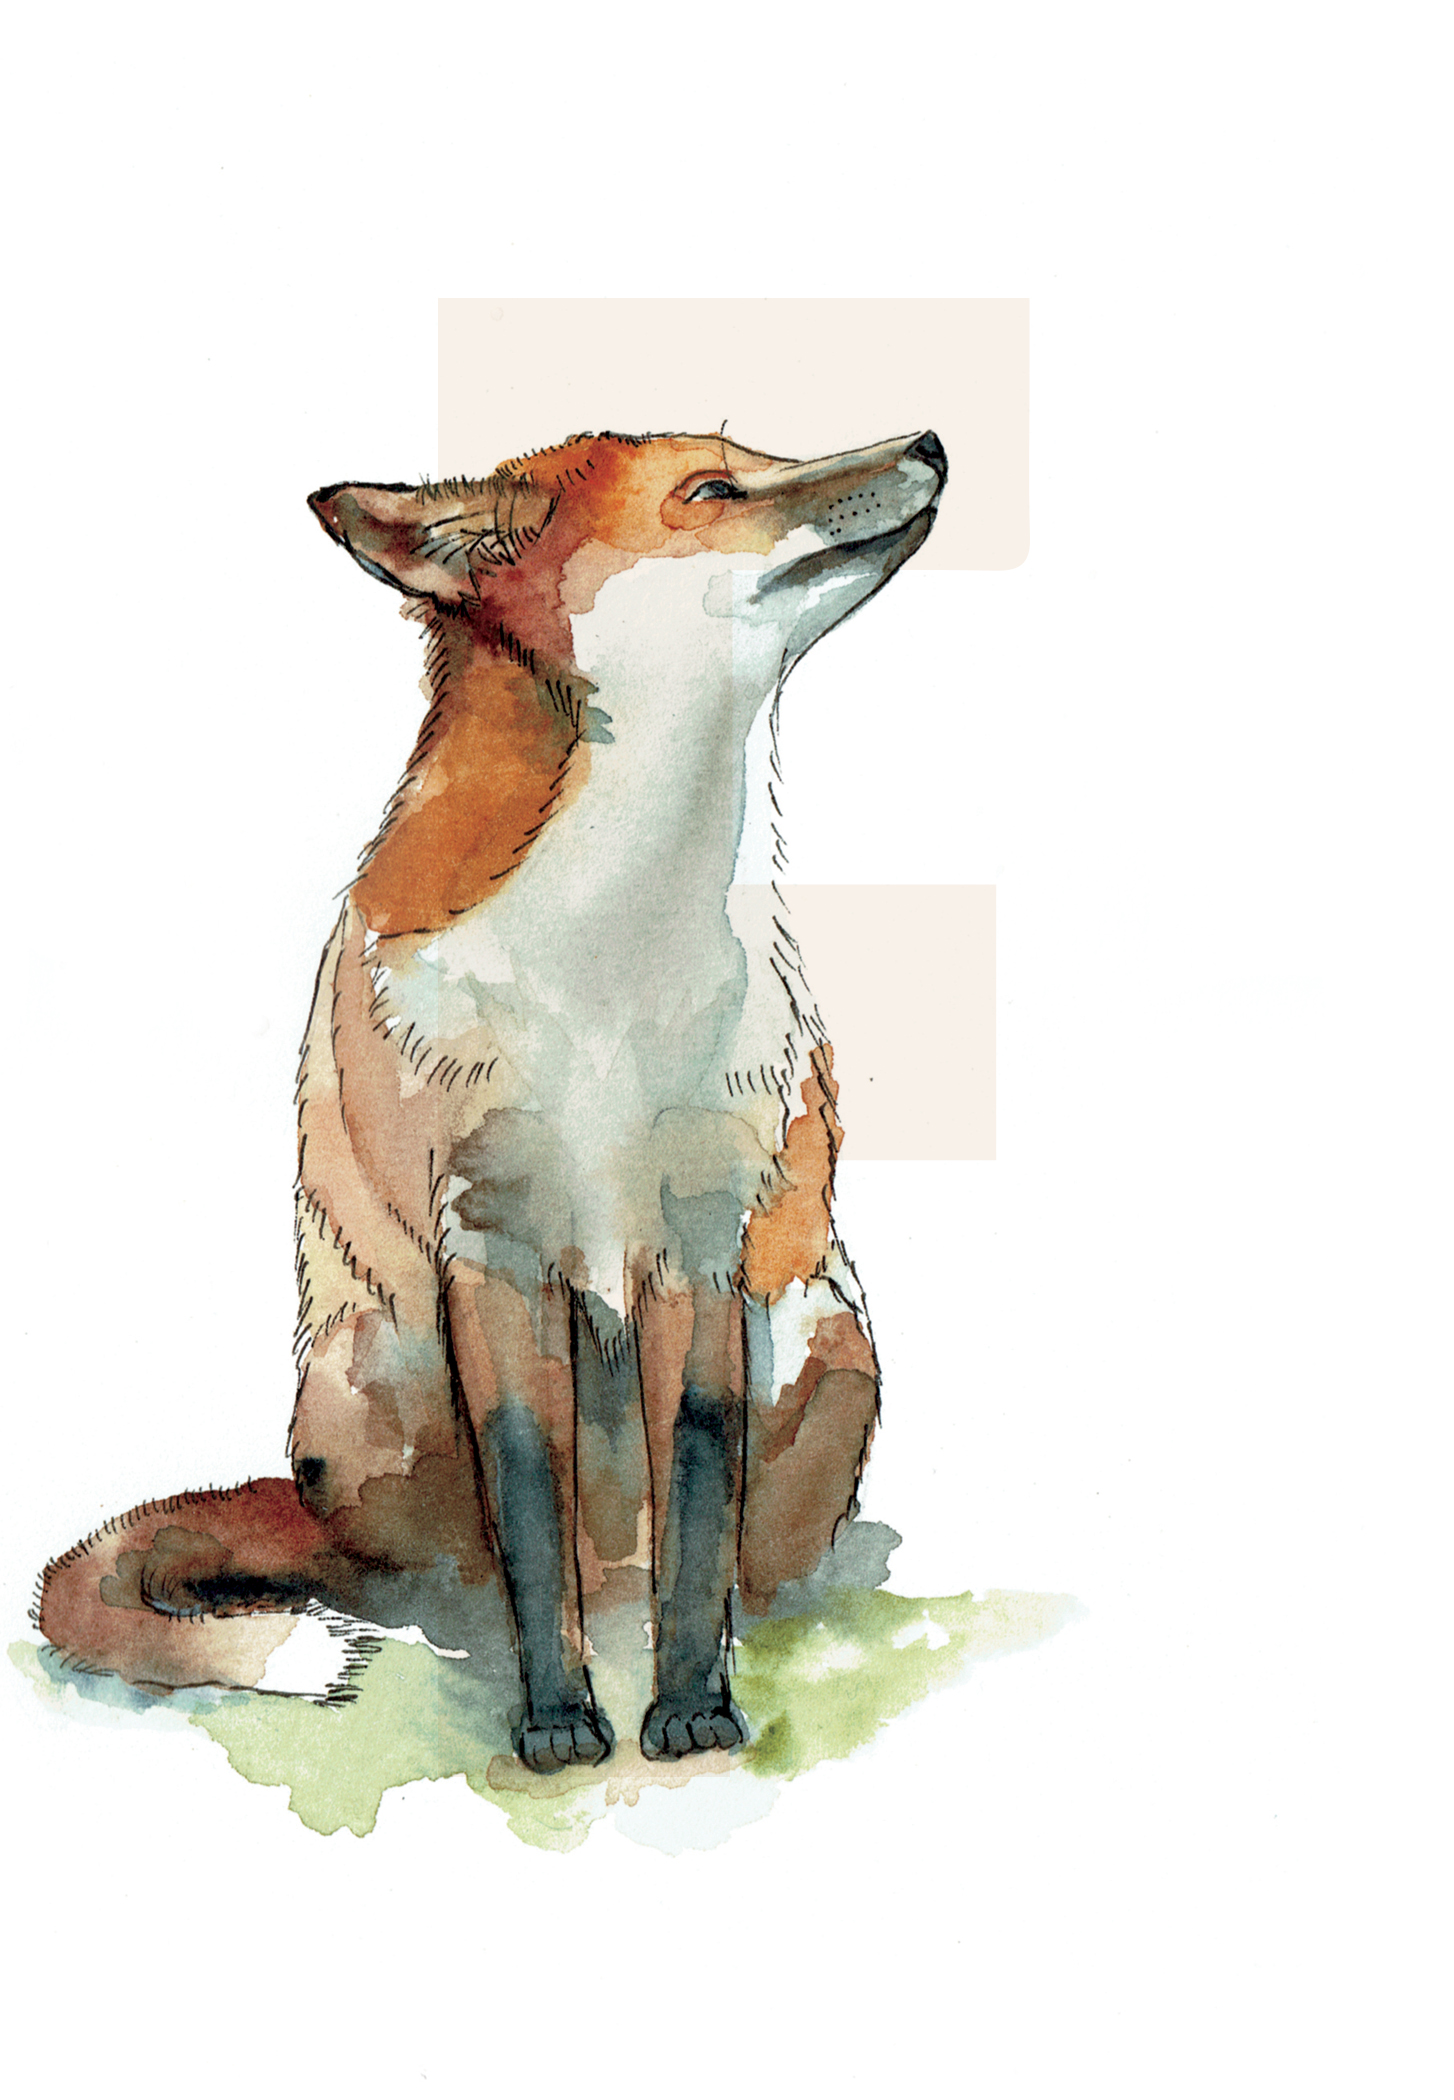 F is for Fox